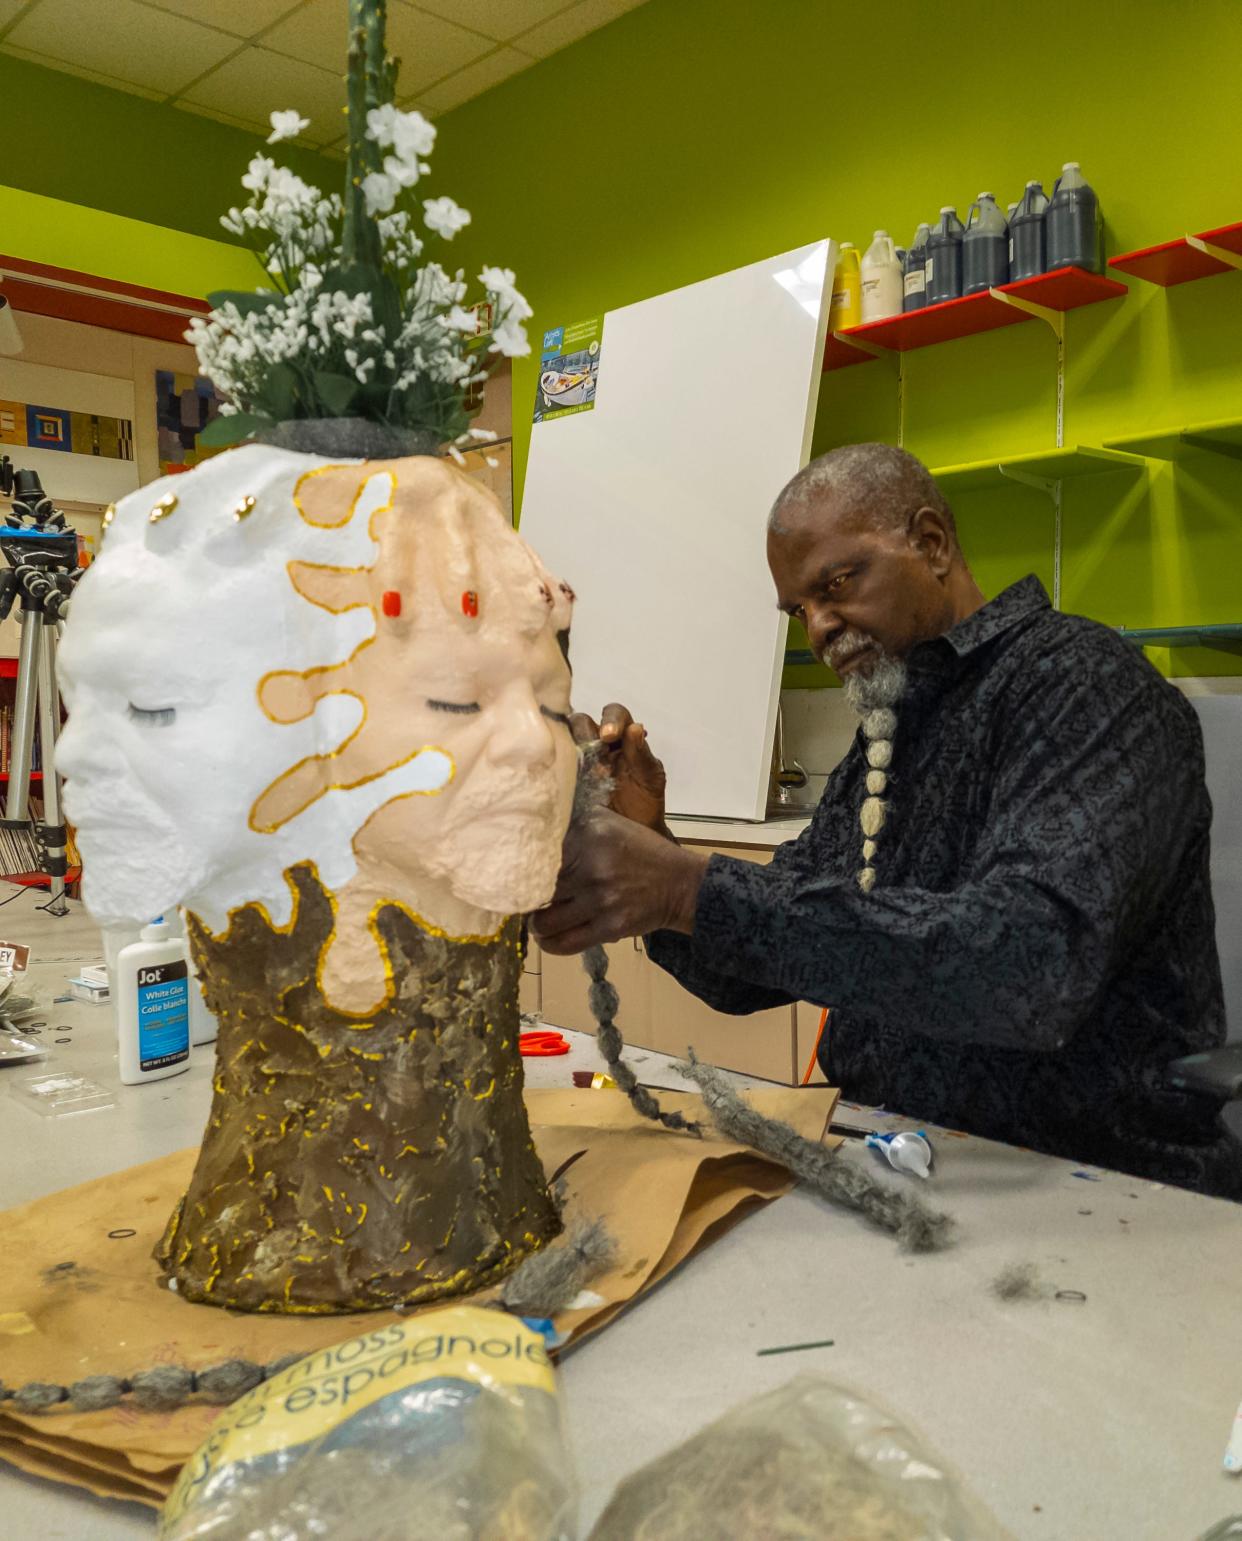 Artist, Mr. Wash, puts the finishing touches on a sculpture to be shown in the 'Outbursts' exhibit at The Palm Springs Art Museum.